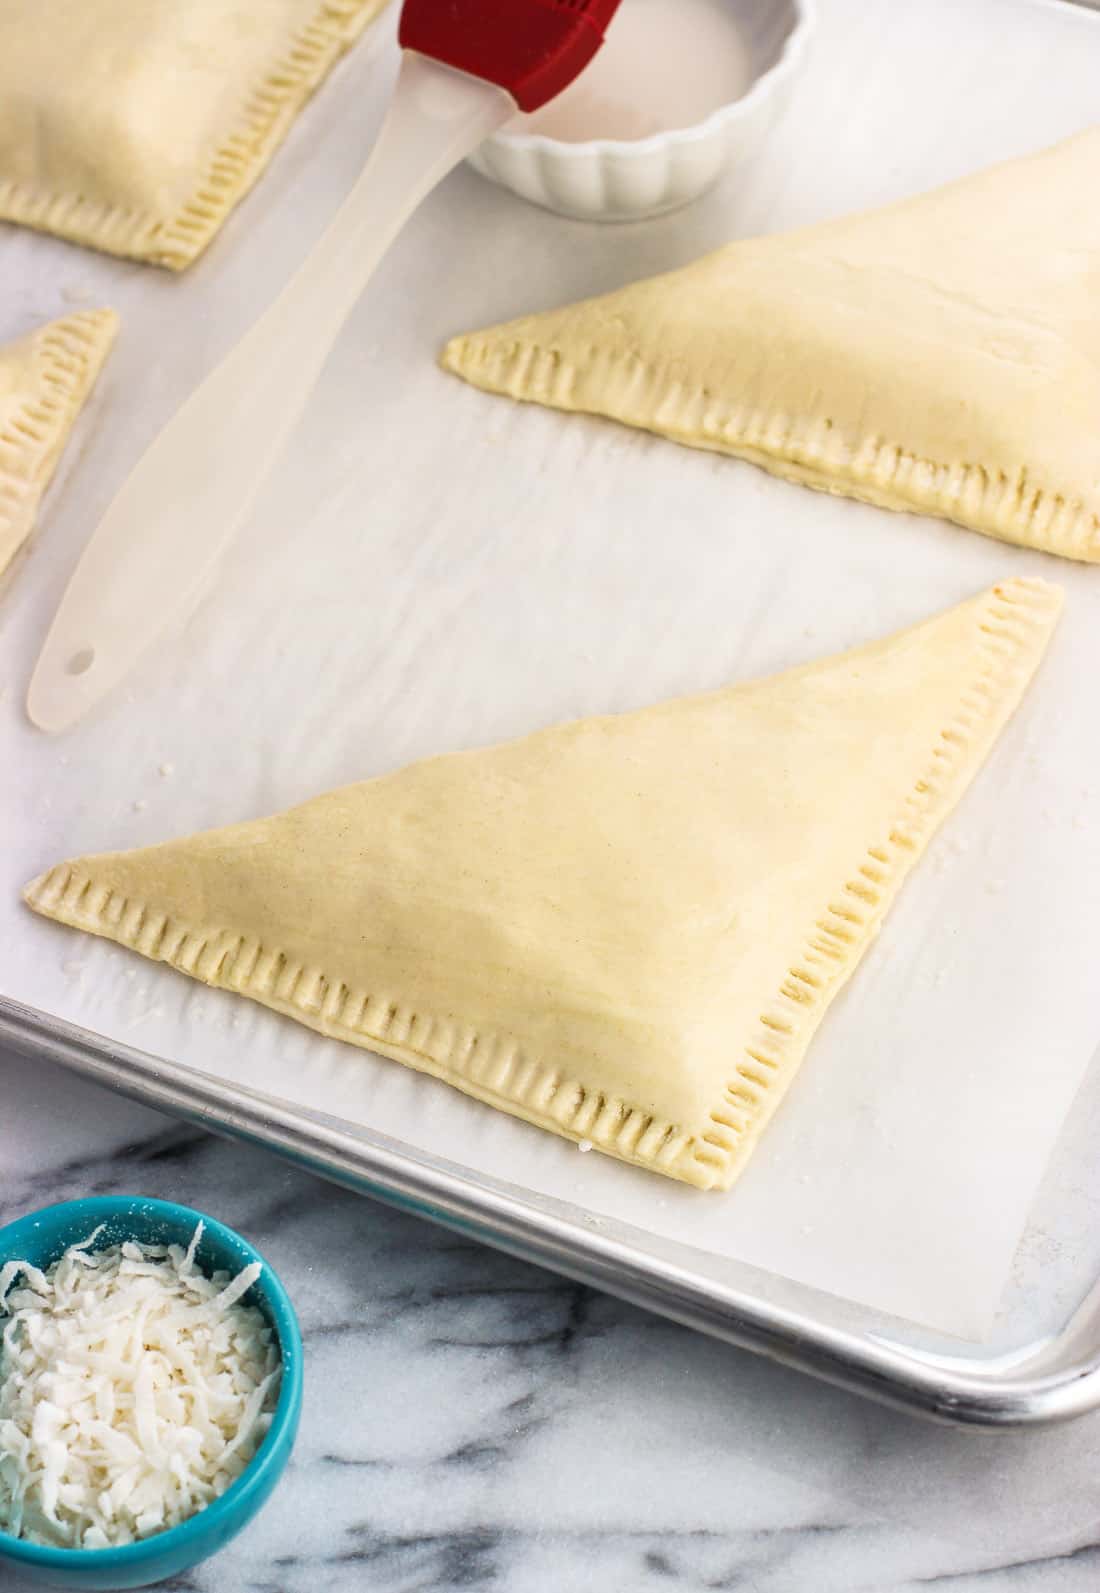 Triangular turnovers with two edges crimped on a parchment-lined baking sheet before going in the oven